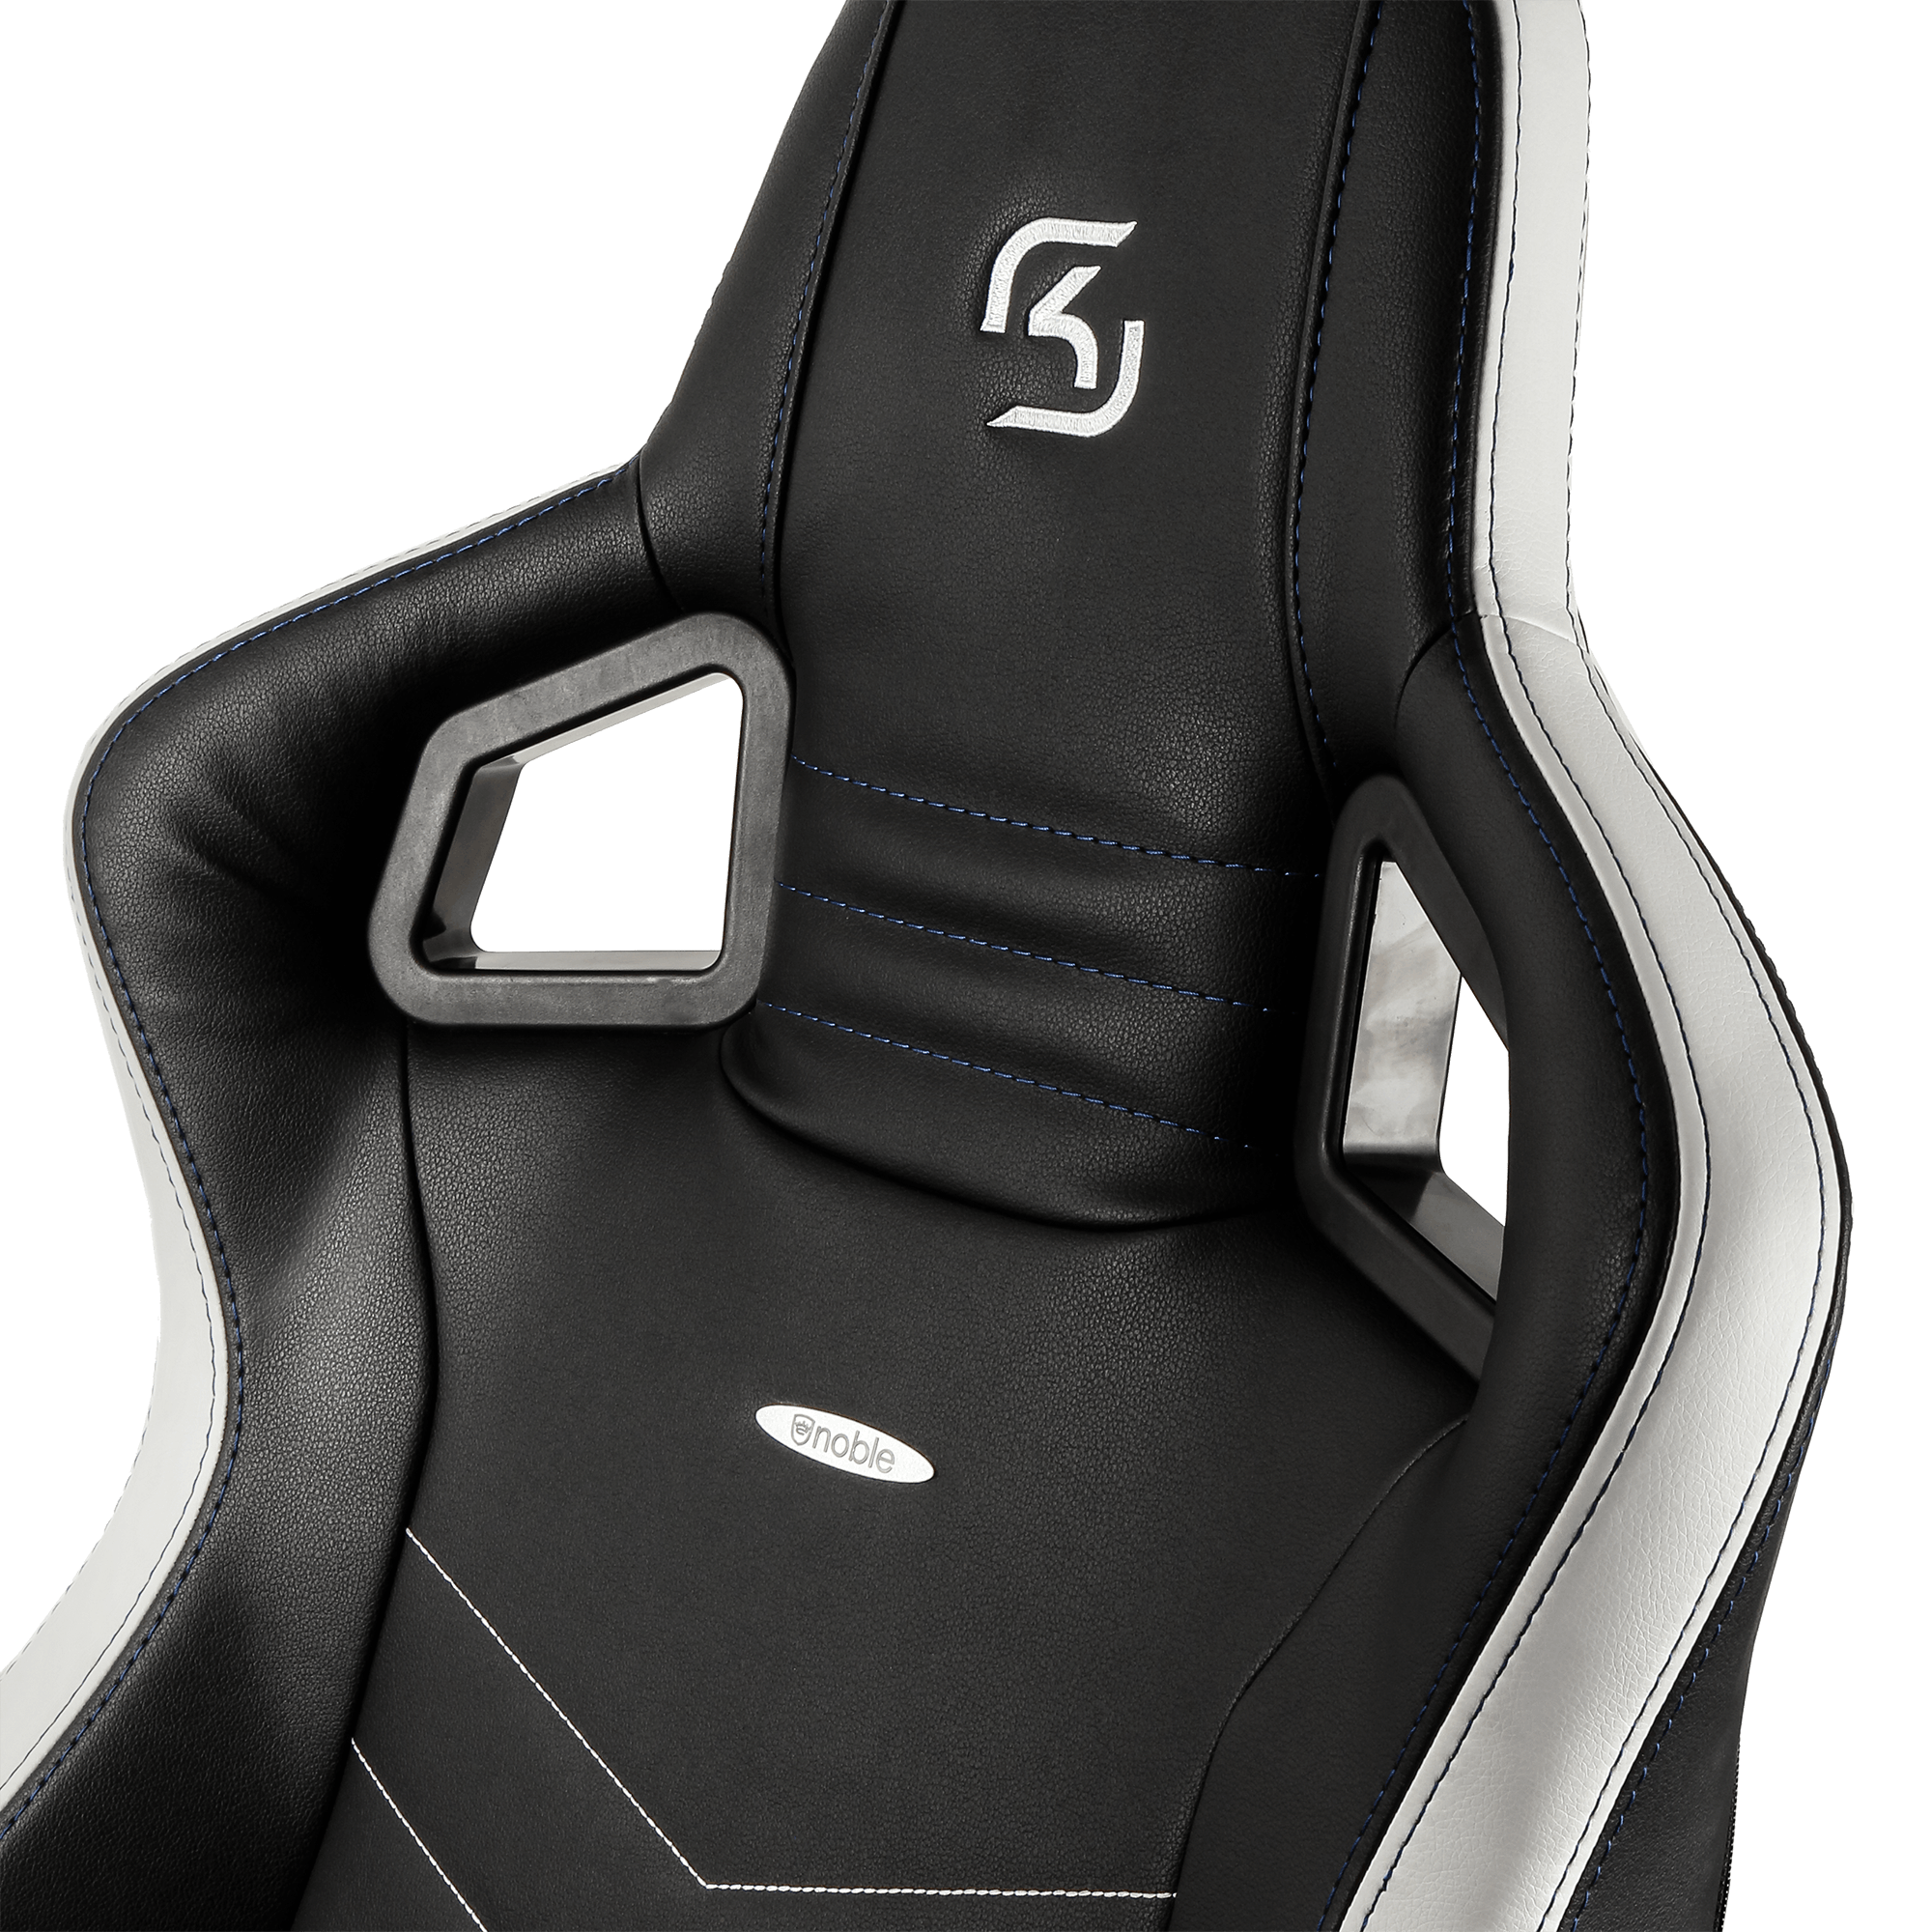 noblechairs - EPIC SK Gaming Editie